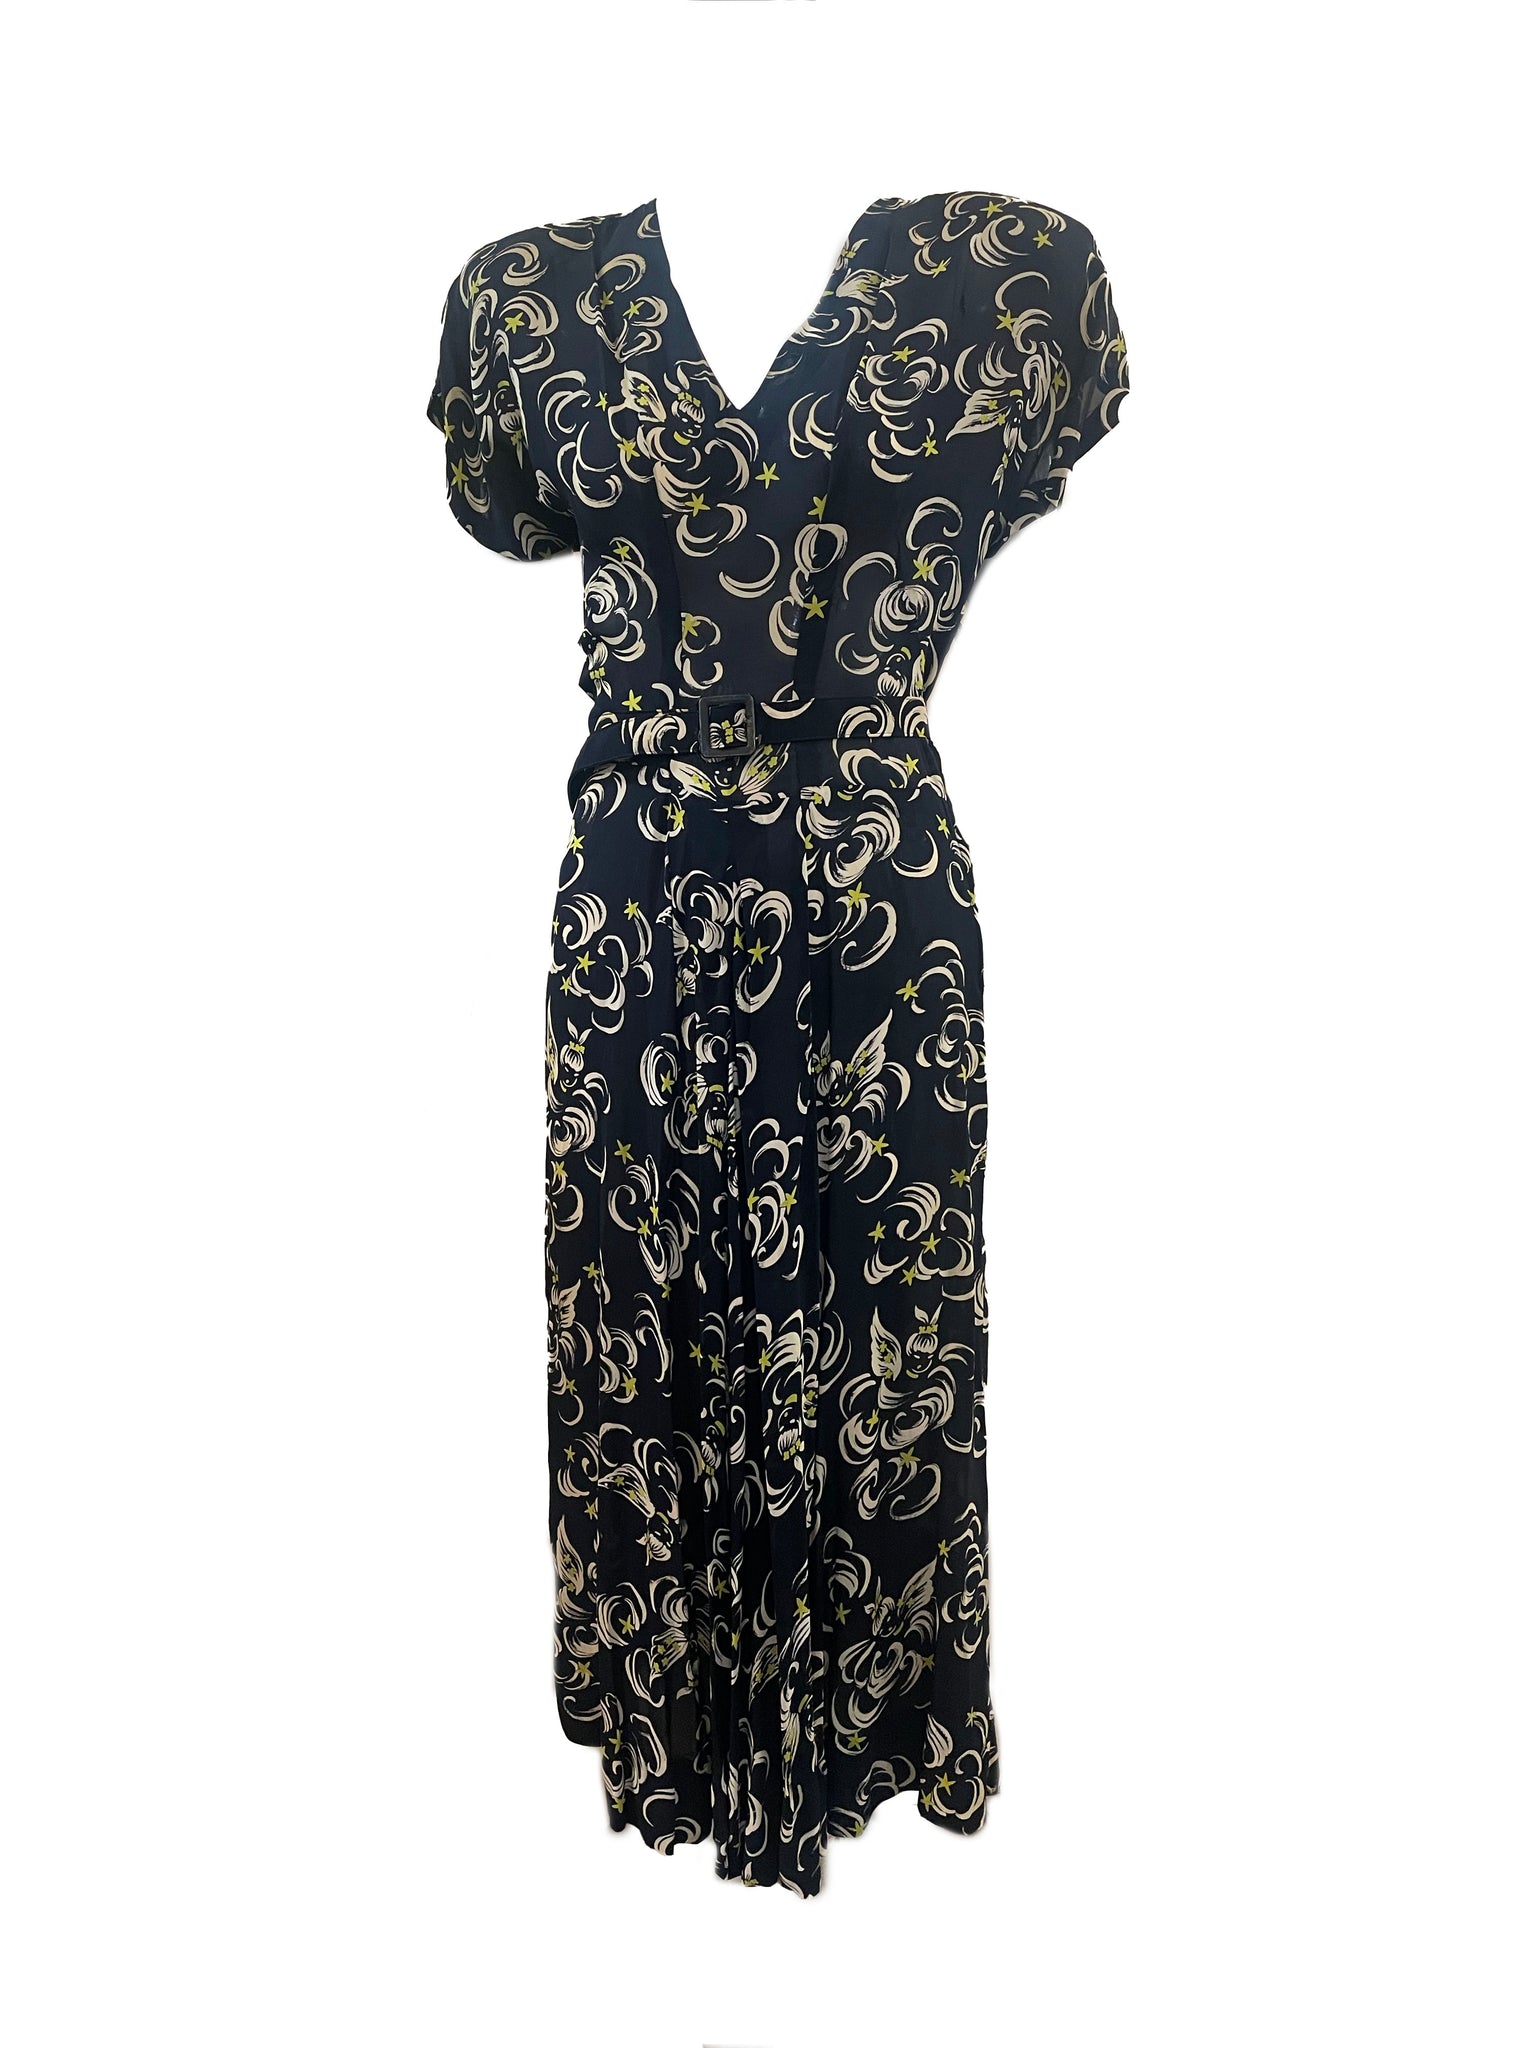 40s Rayon Print Dress with Angelic Celestial Faces – THE WAY WE WORE